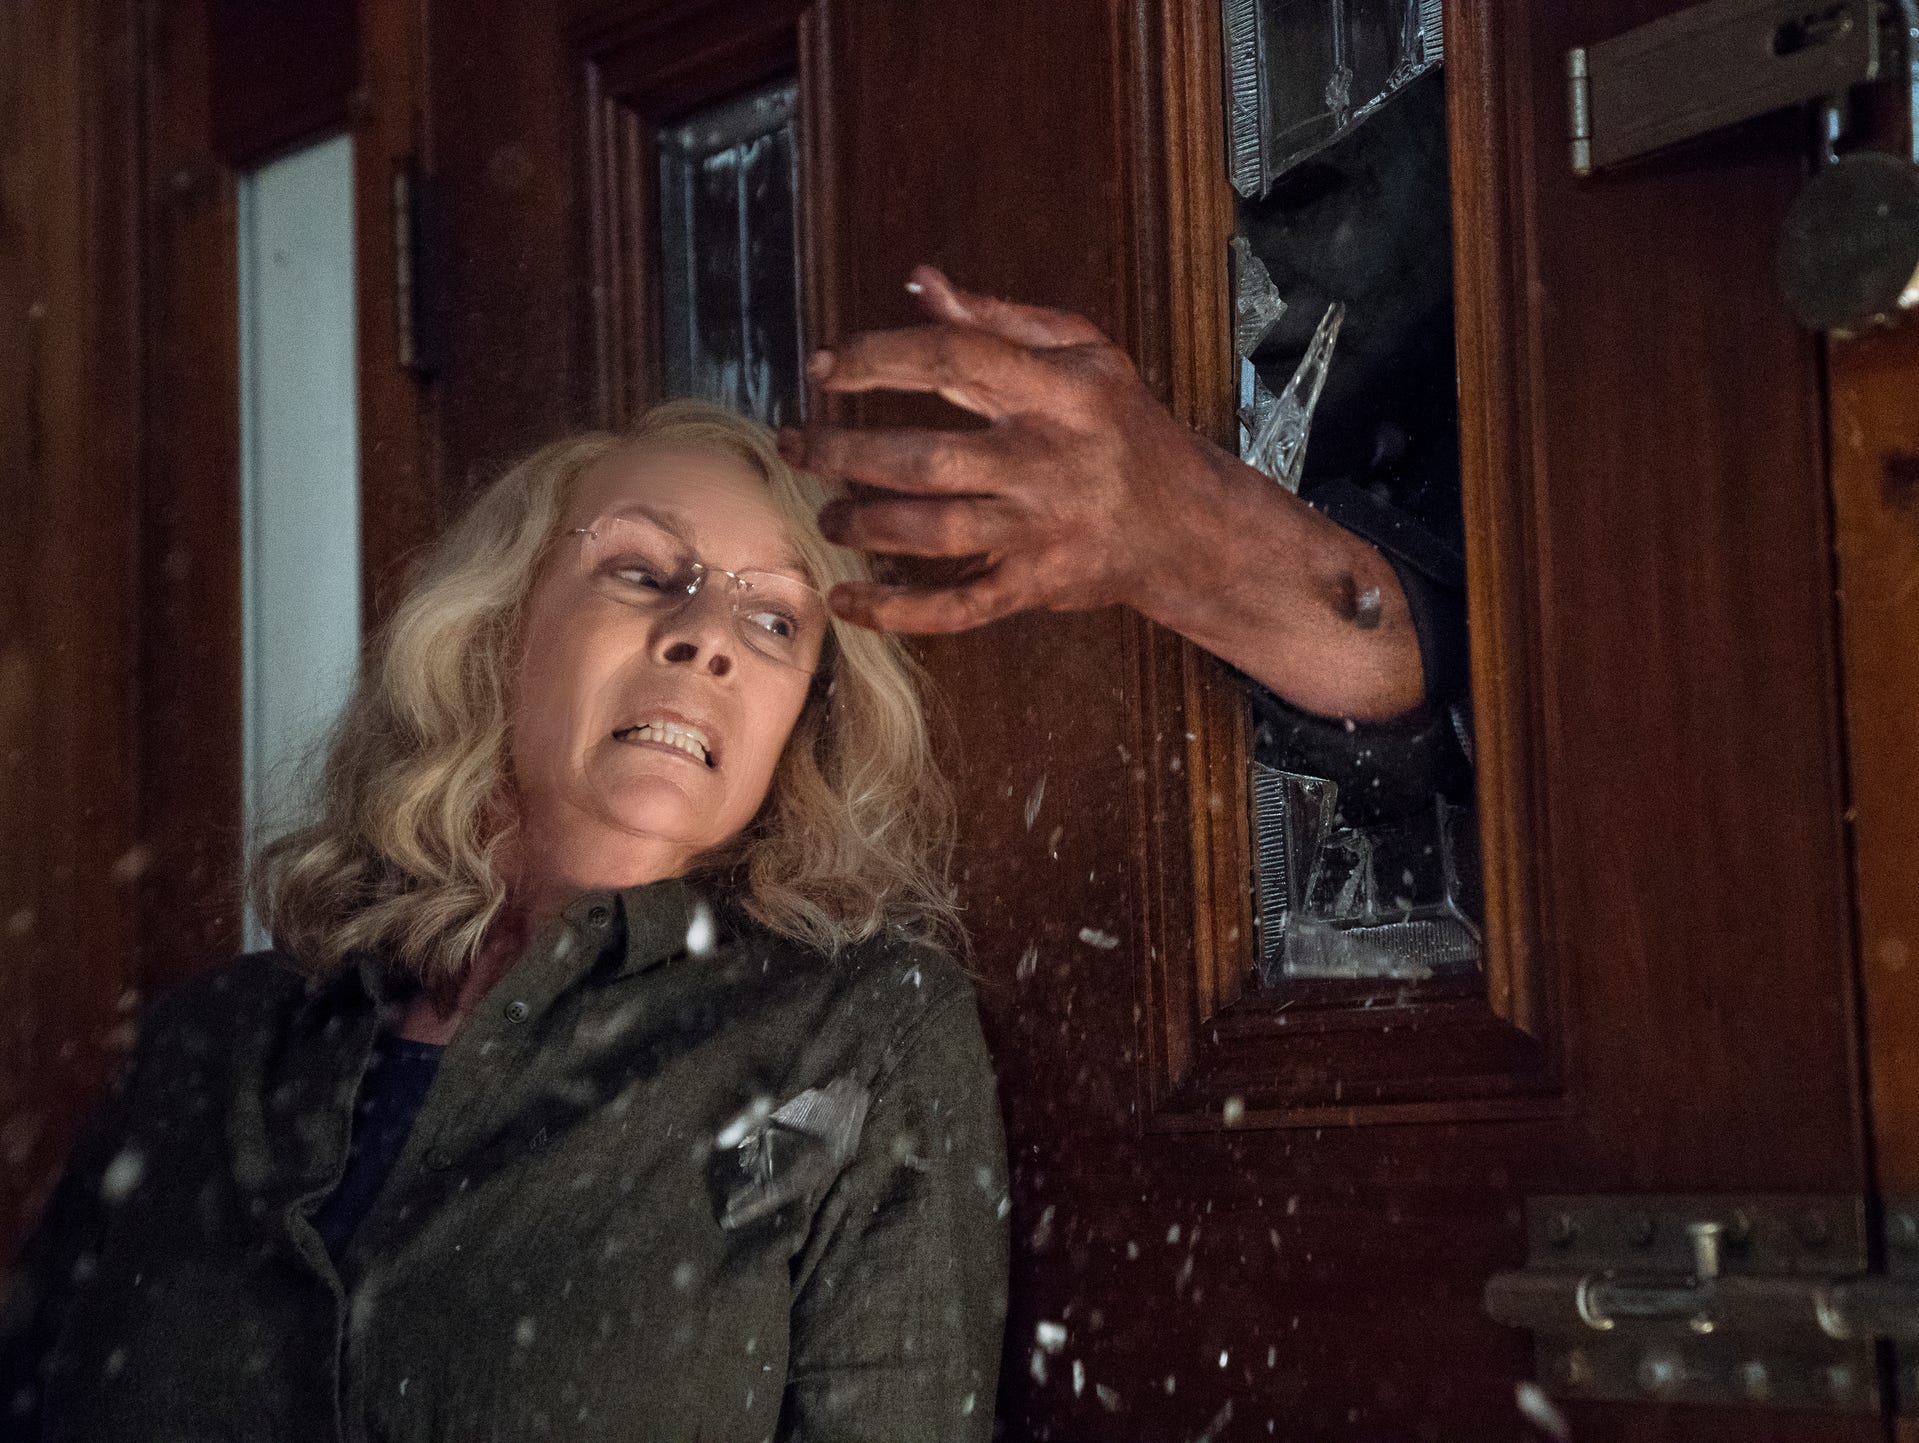 Jamie Lee Curtis reprises her role as Laurie Strode